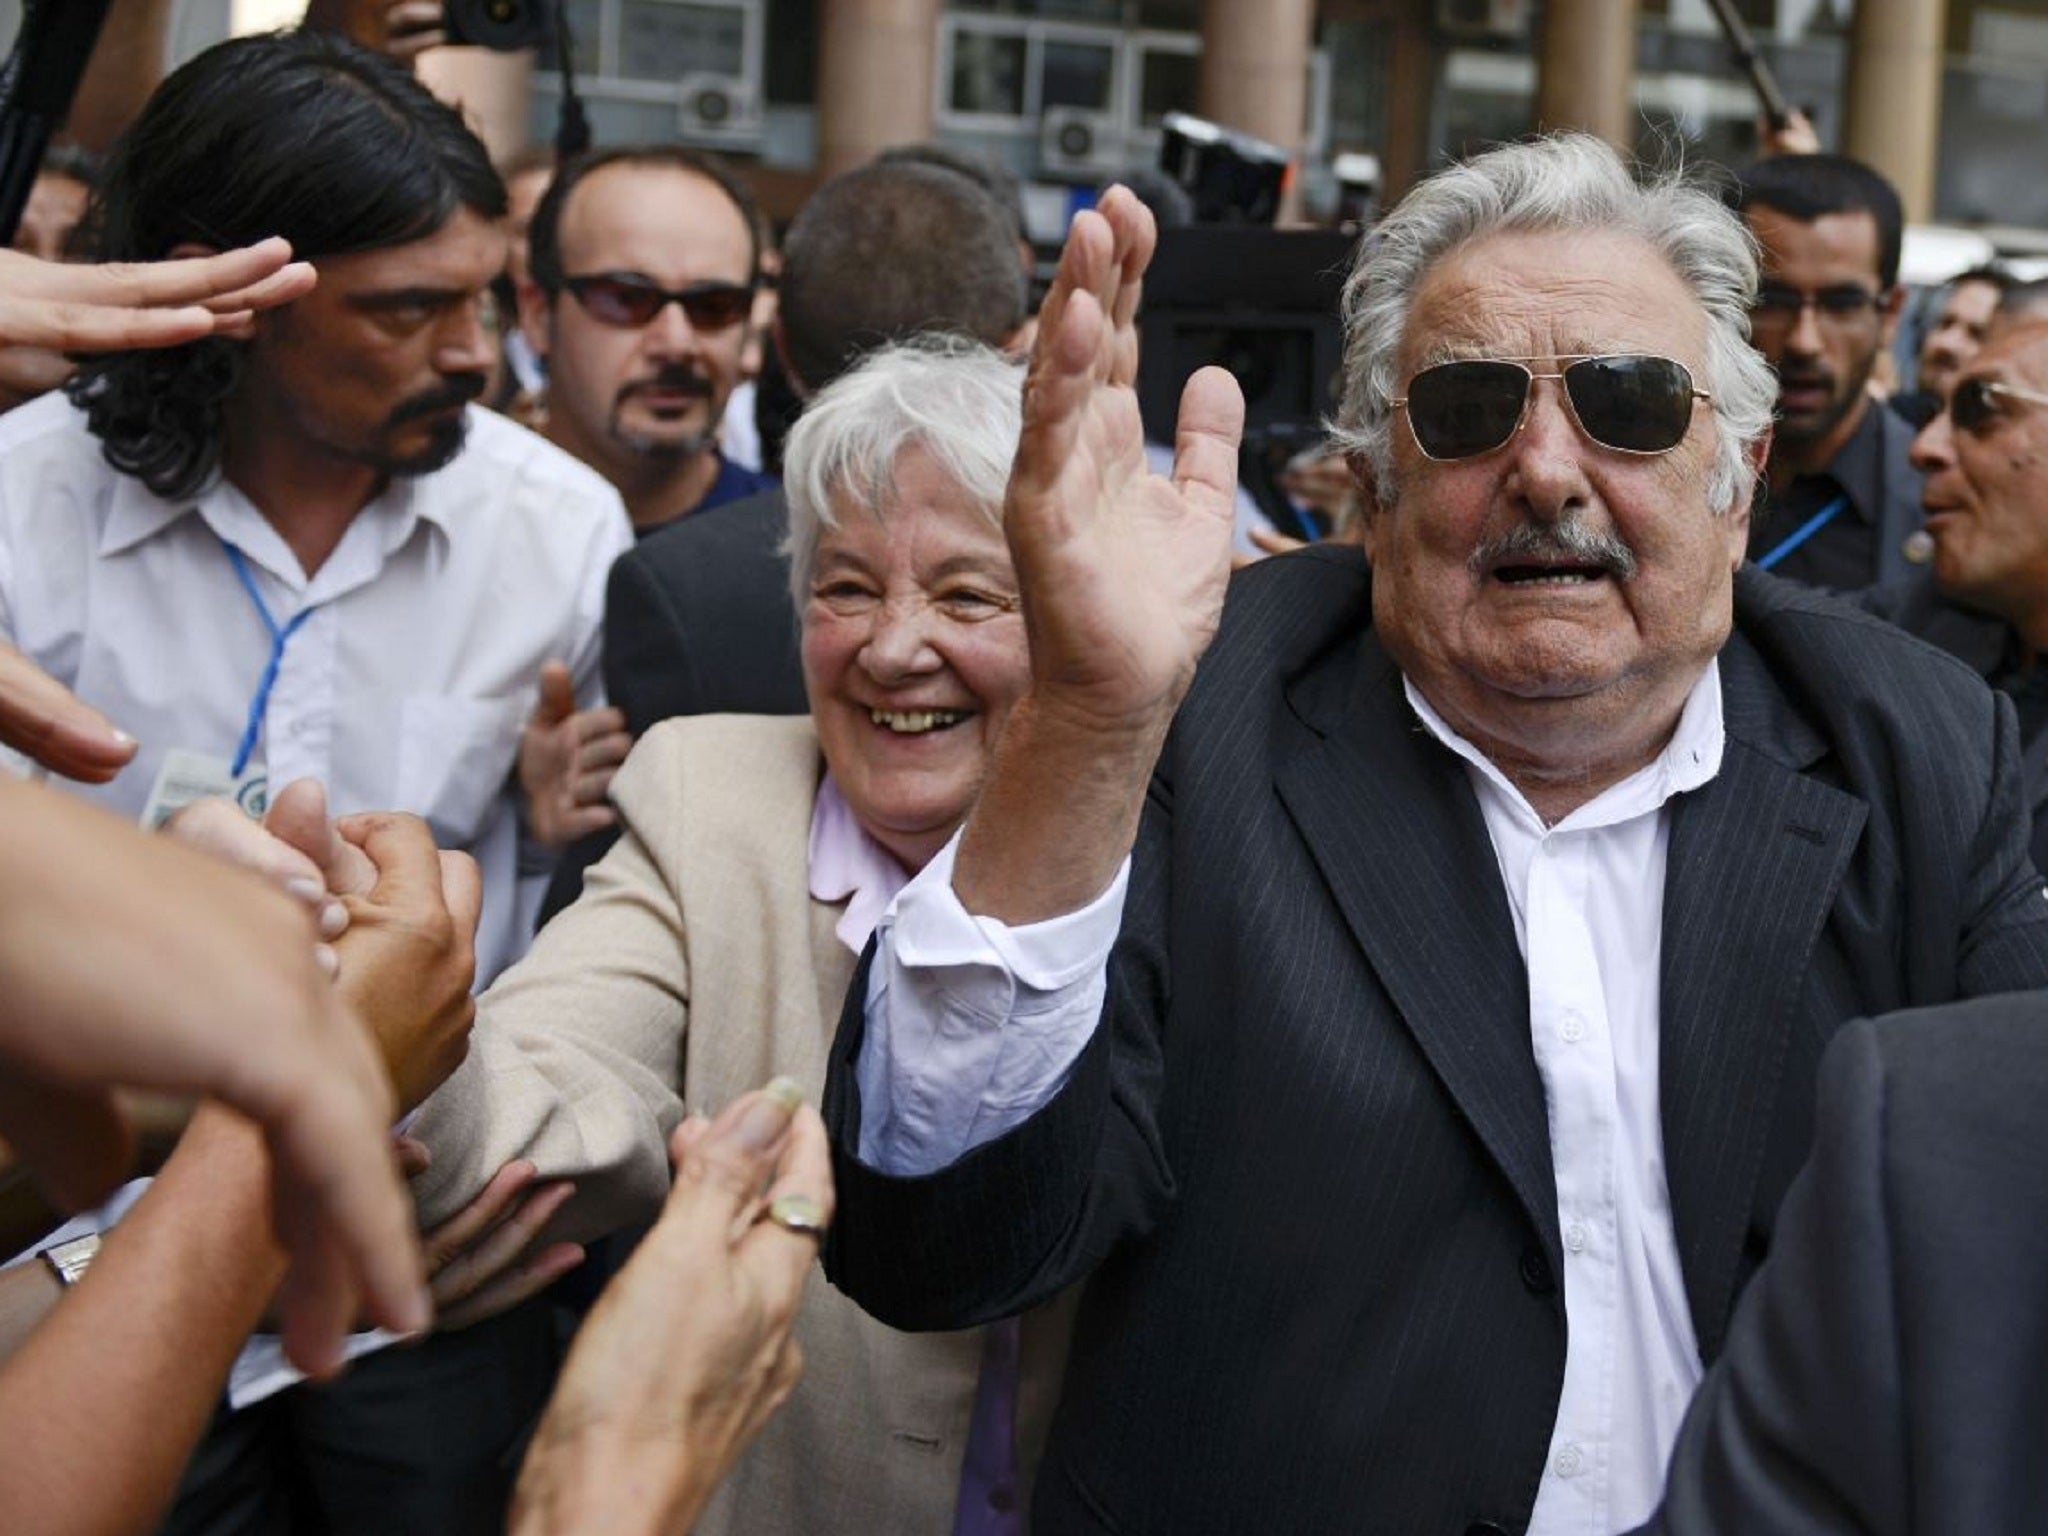 Jose Mujica with his wife being applauded and cheered on by crowds in Uruguay